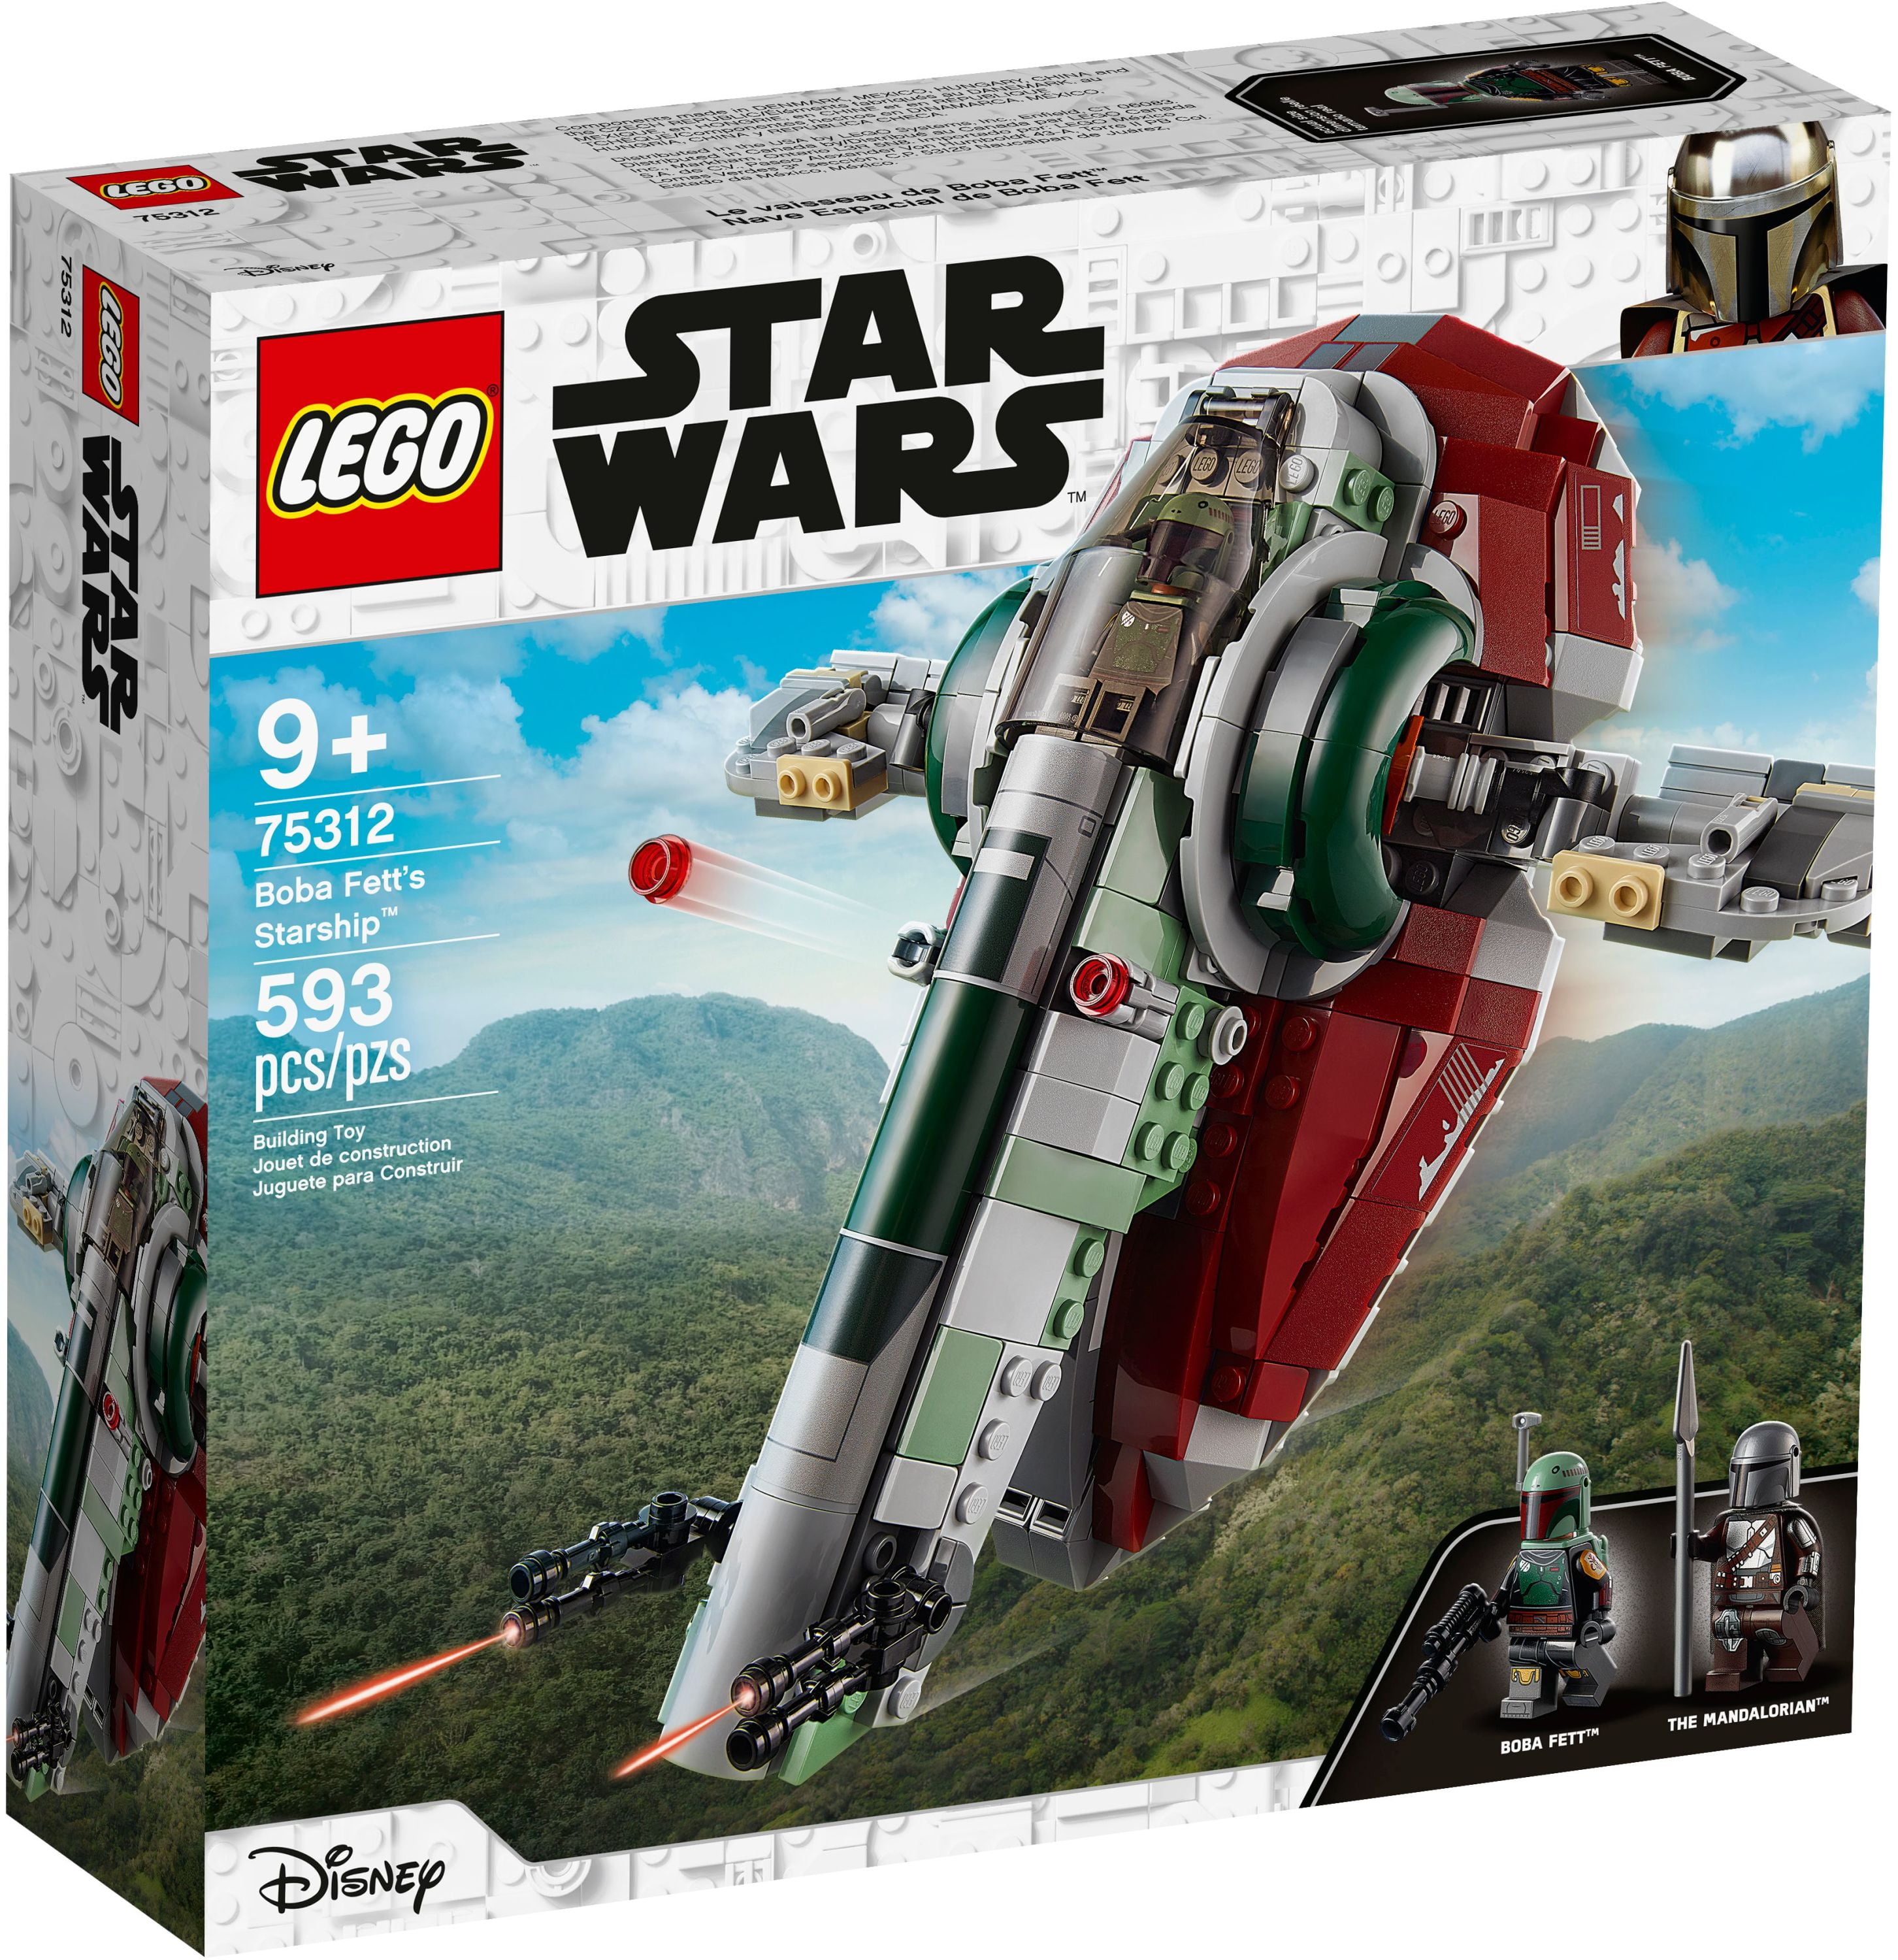 LEGO Star Wars Boba Fett 75312 Building Toy - Mandalorian Model Set Featuring Iconic Starfighter with Rotating Wings and 2 Minifigures, Fun and Imaginative Build for Age 9+ - Walmart.com